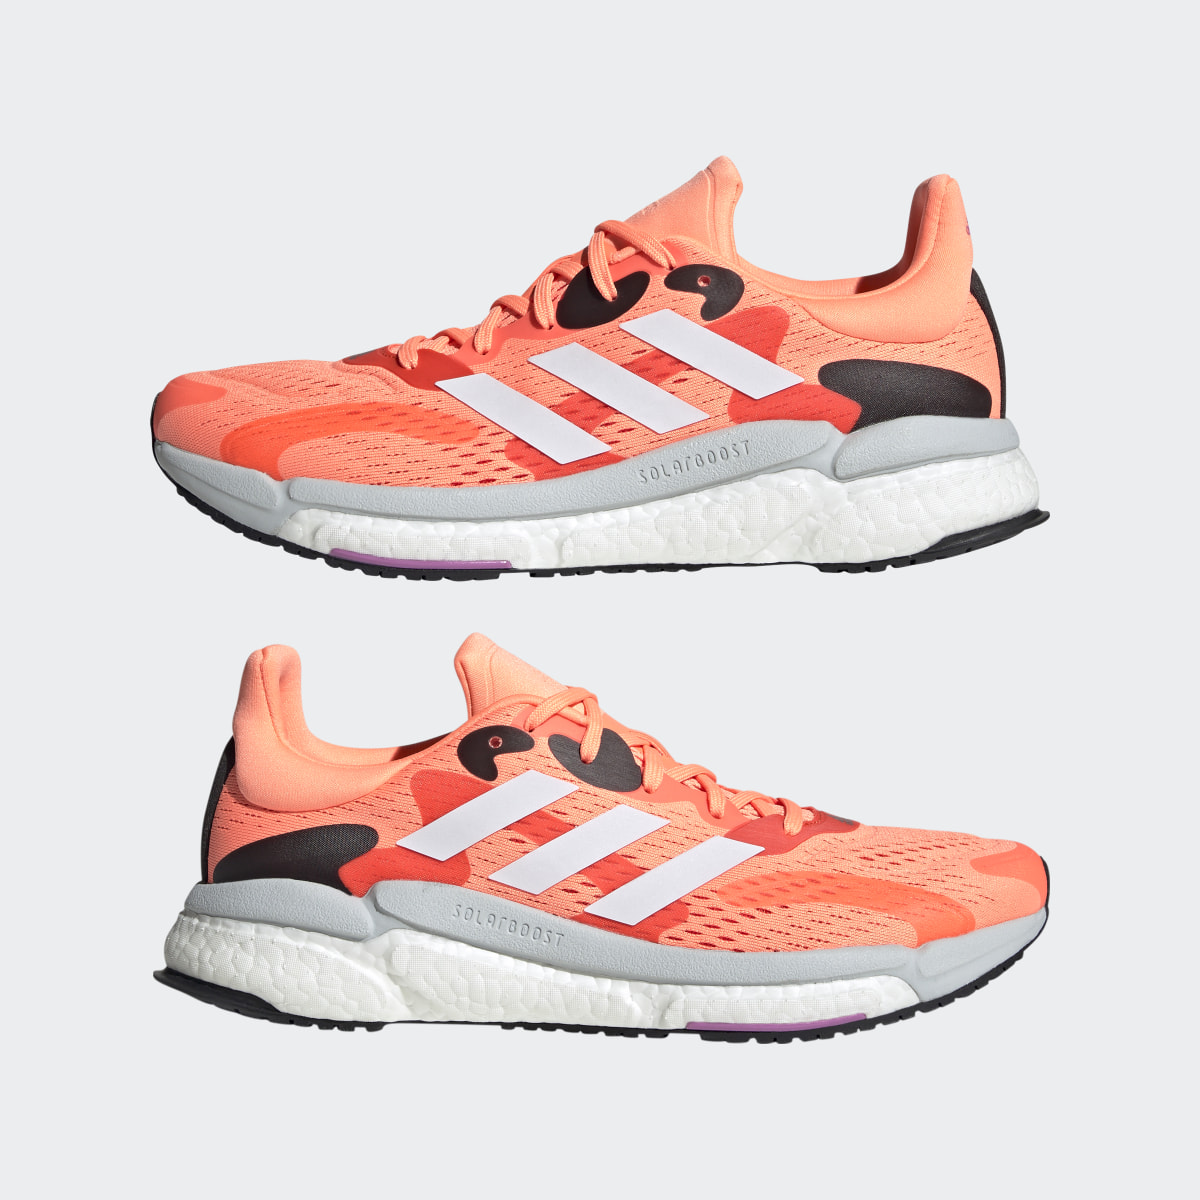 Adidas Solarboost 4 Shoes. 8